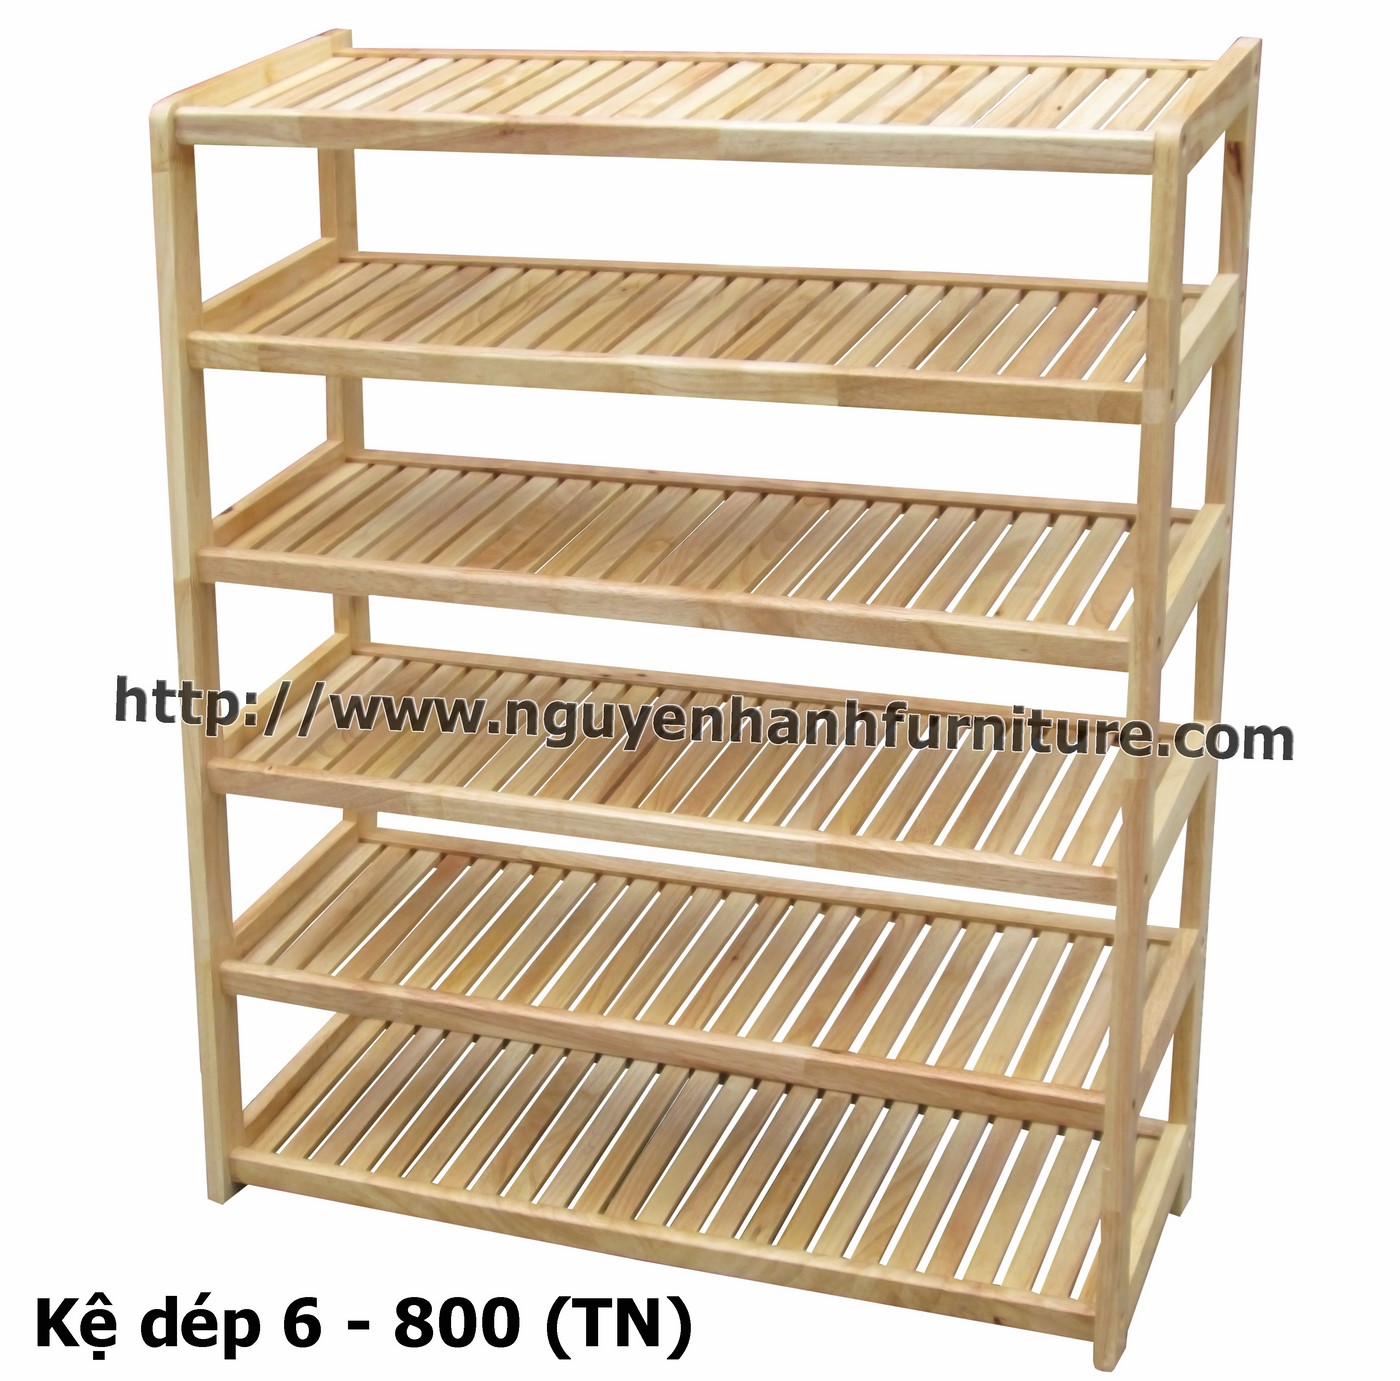 Name product: Shoeshelf 6 Floors 80 with sparse blades (Natural) - Dimensions: 80 x 30 x 98 (H) - Description: Wood natural rubber